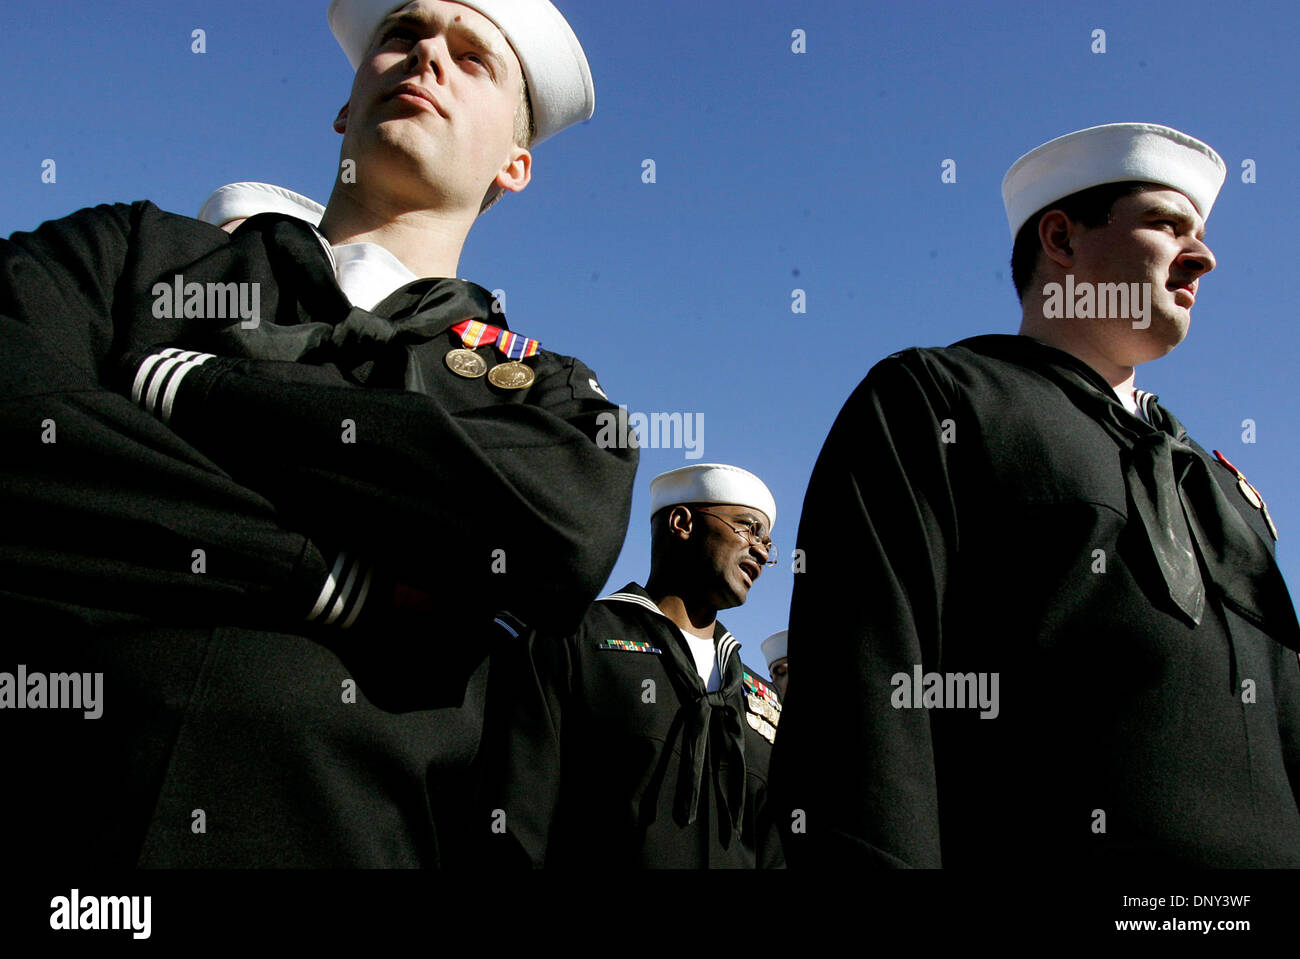 Jan 14, 2006; Ingleside, TX, USA; Crew members of the USS San Antonio Edmund Debit (from left), Tory Evans, and Joseph Lyles, await the beginning of the ship's commissioning ceremony at Naval Station Ingleside. Mandatory Credit: Photo by Mike Kane/San Antonio Express-News/ZUMA Press. (©) Copyright 2006 by San Antonio Express-News Stock Photo